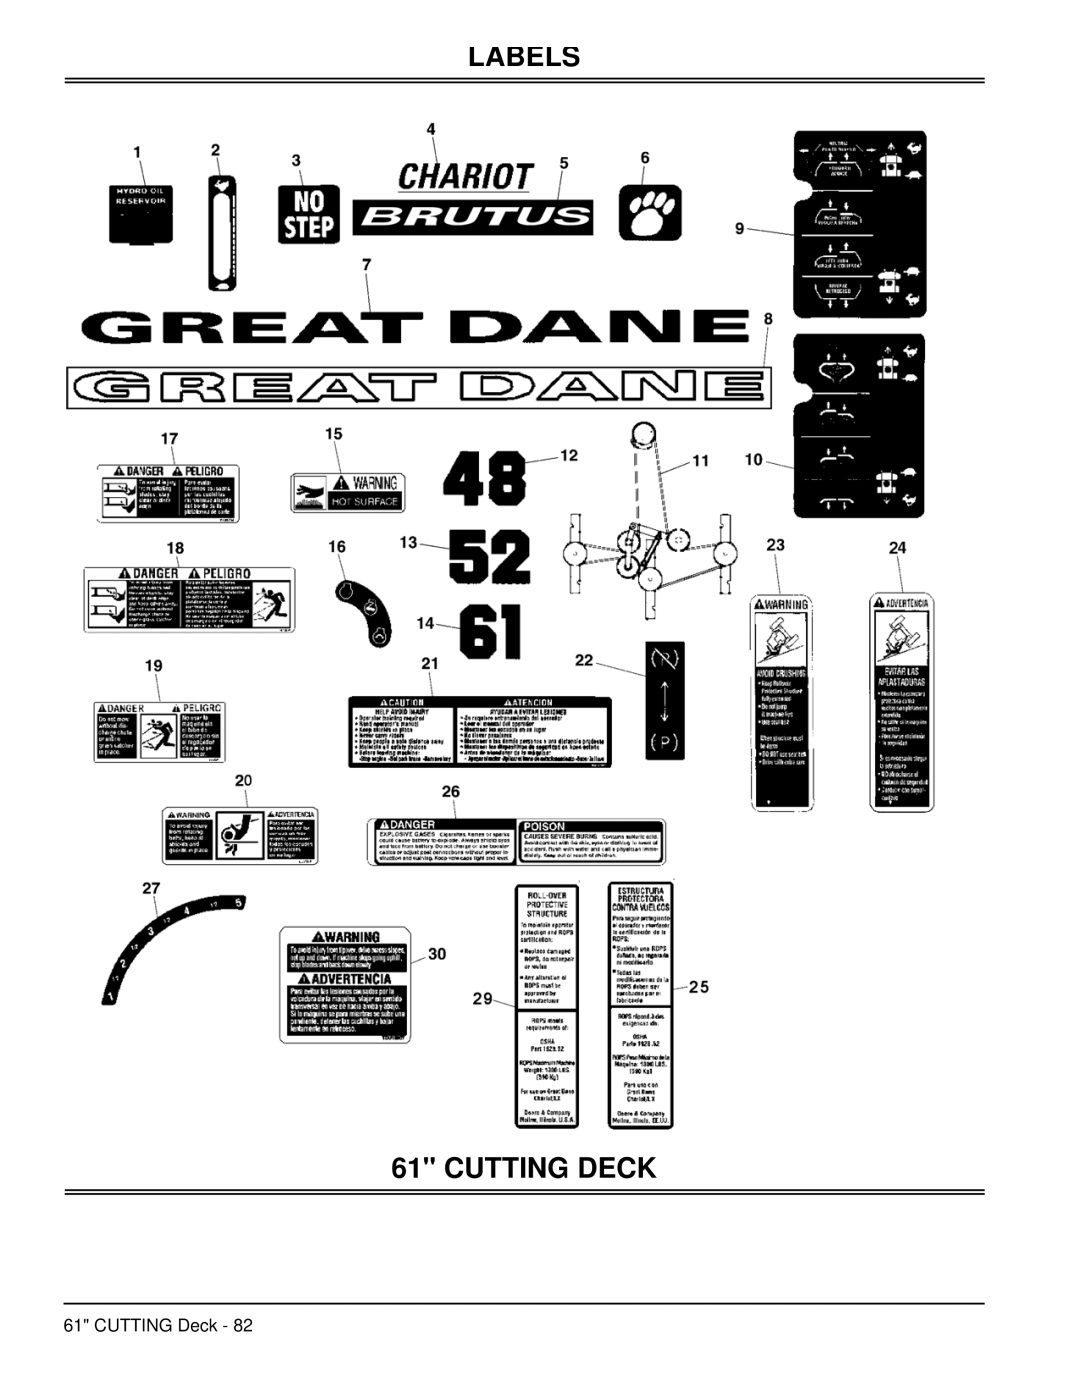 Great Dane GBKH2761S, GBKW2552S, GBKH2752S, GBKW2561S manual Labels Cutting Deck 